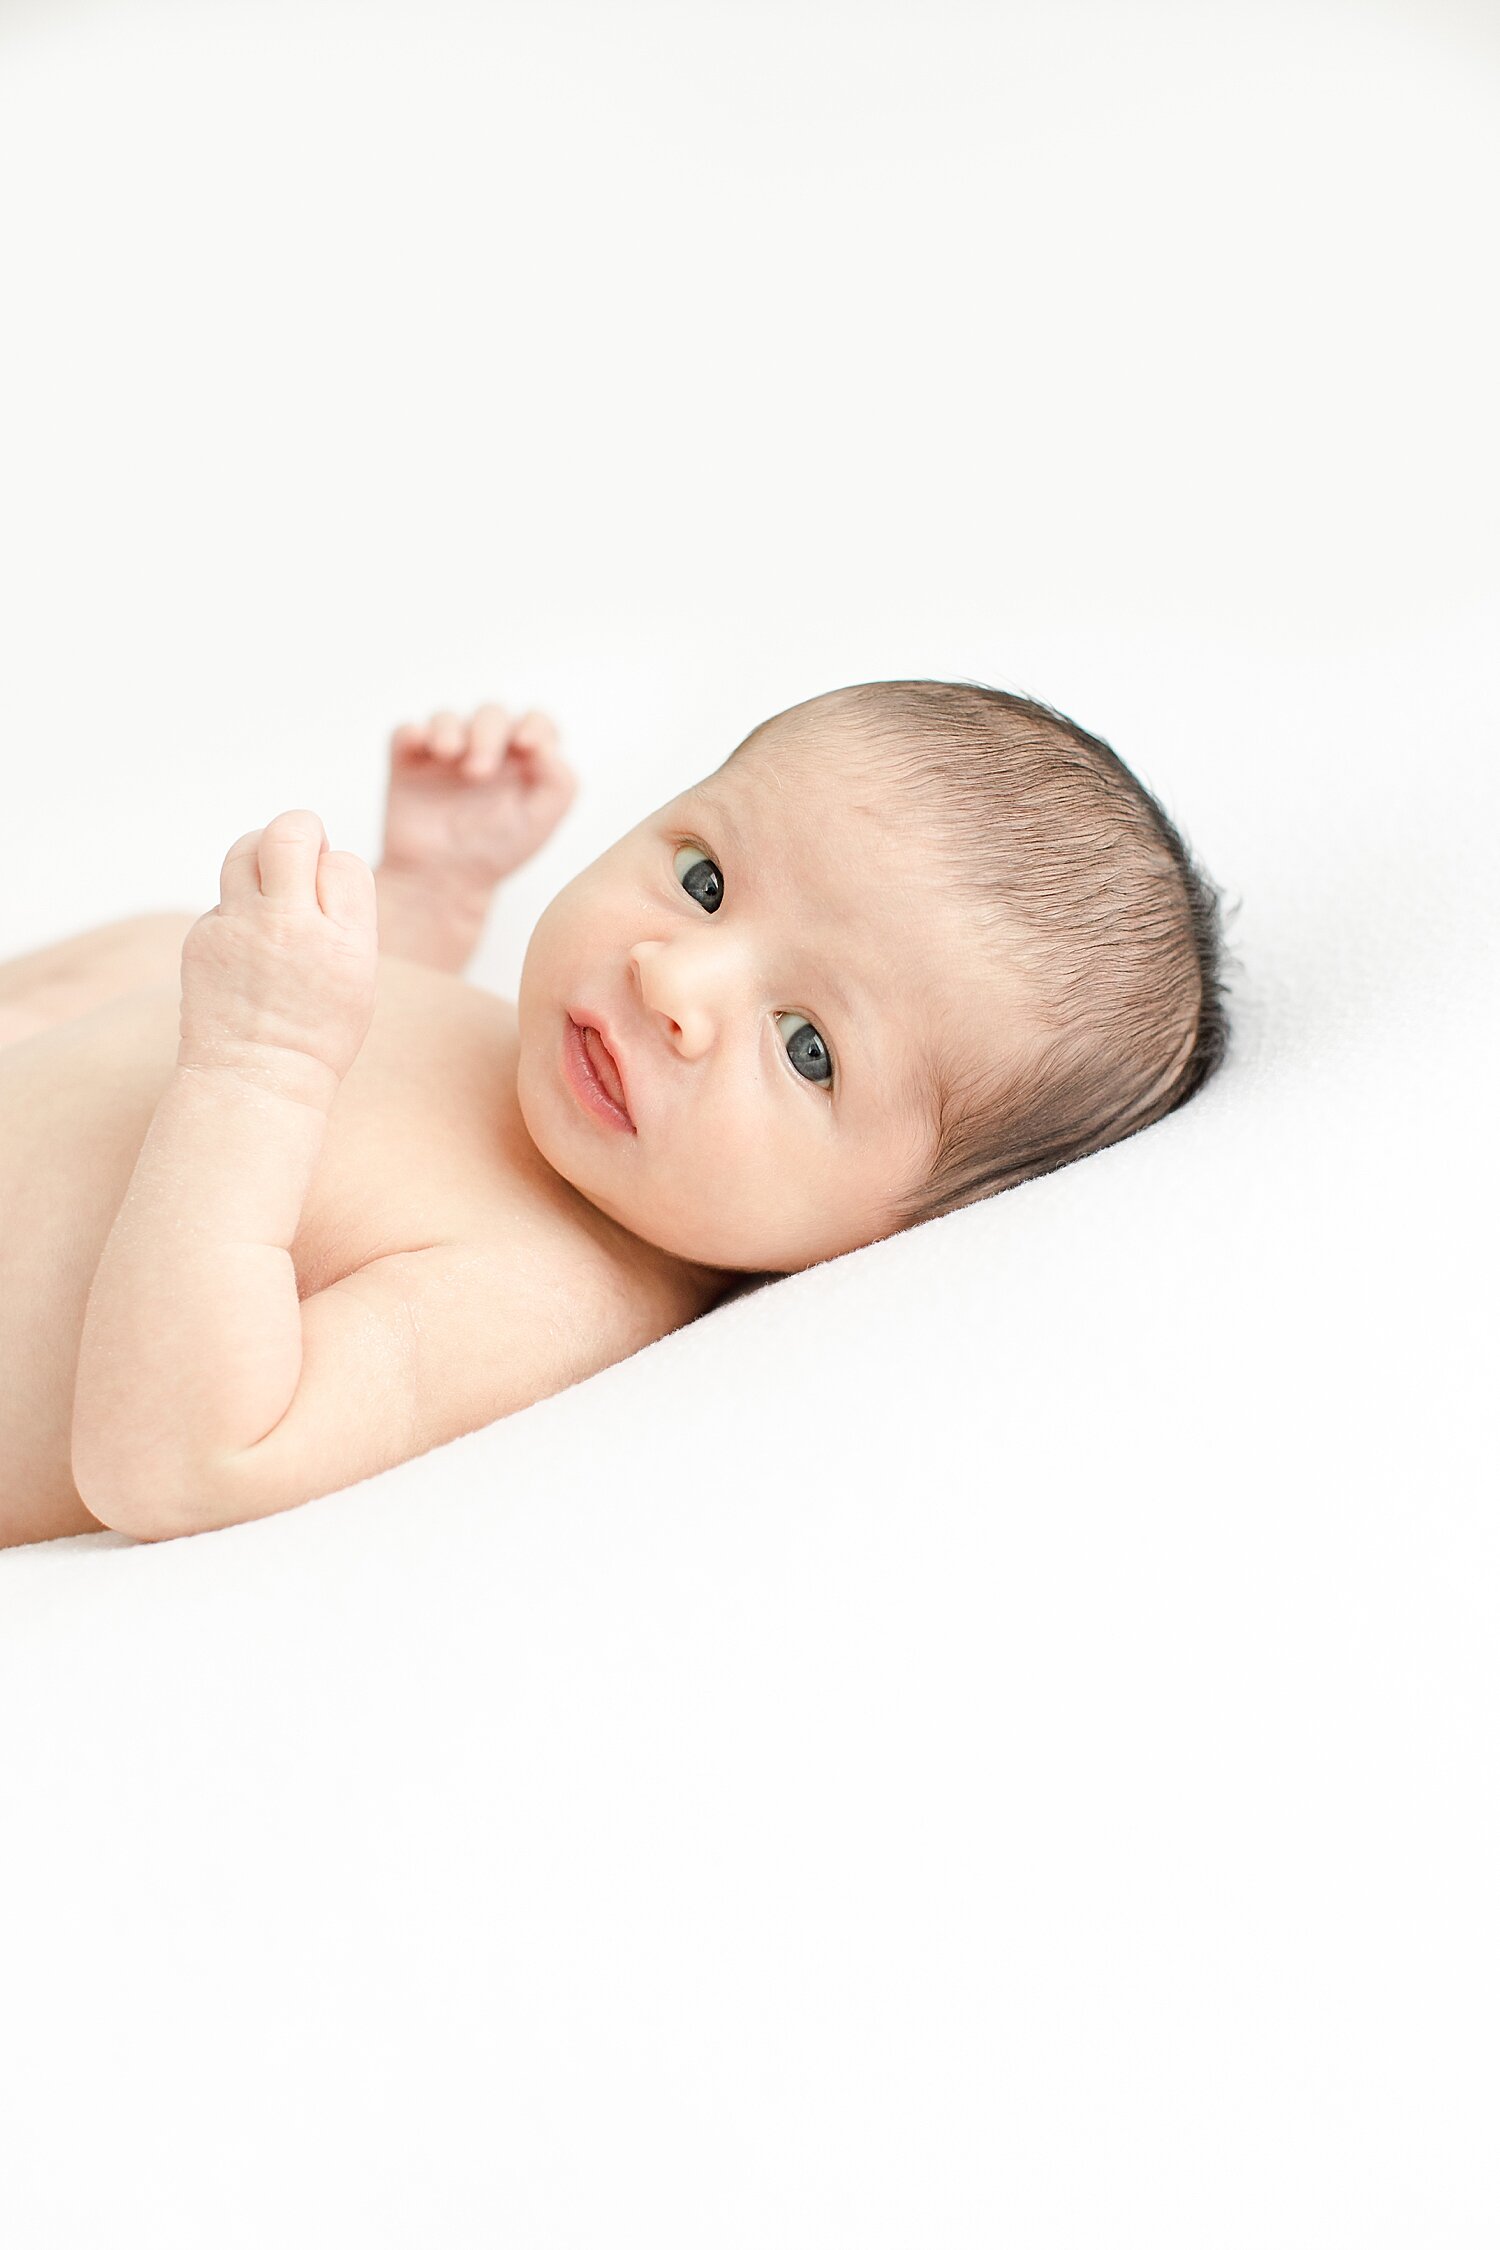 Newborn session for baby boy in studio with CT Newborn Photographer, Kristin Wood Photography.